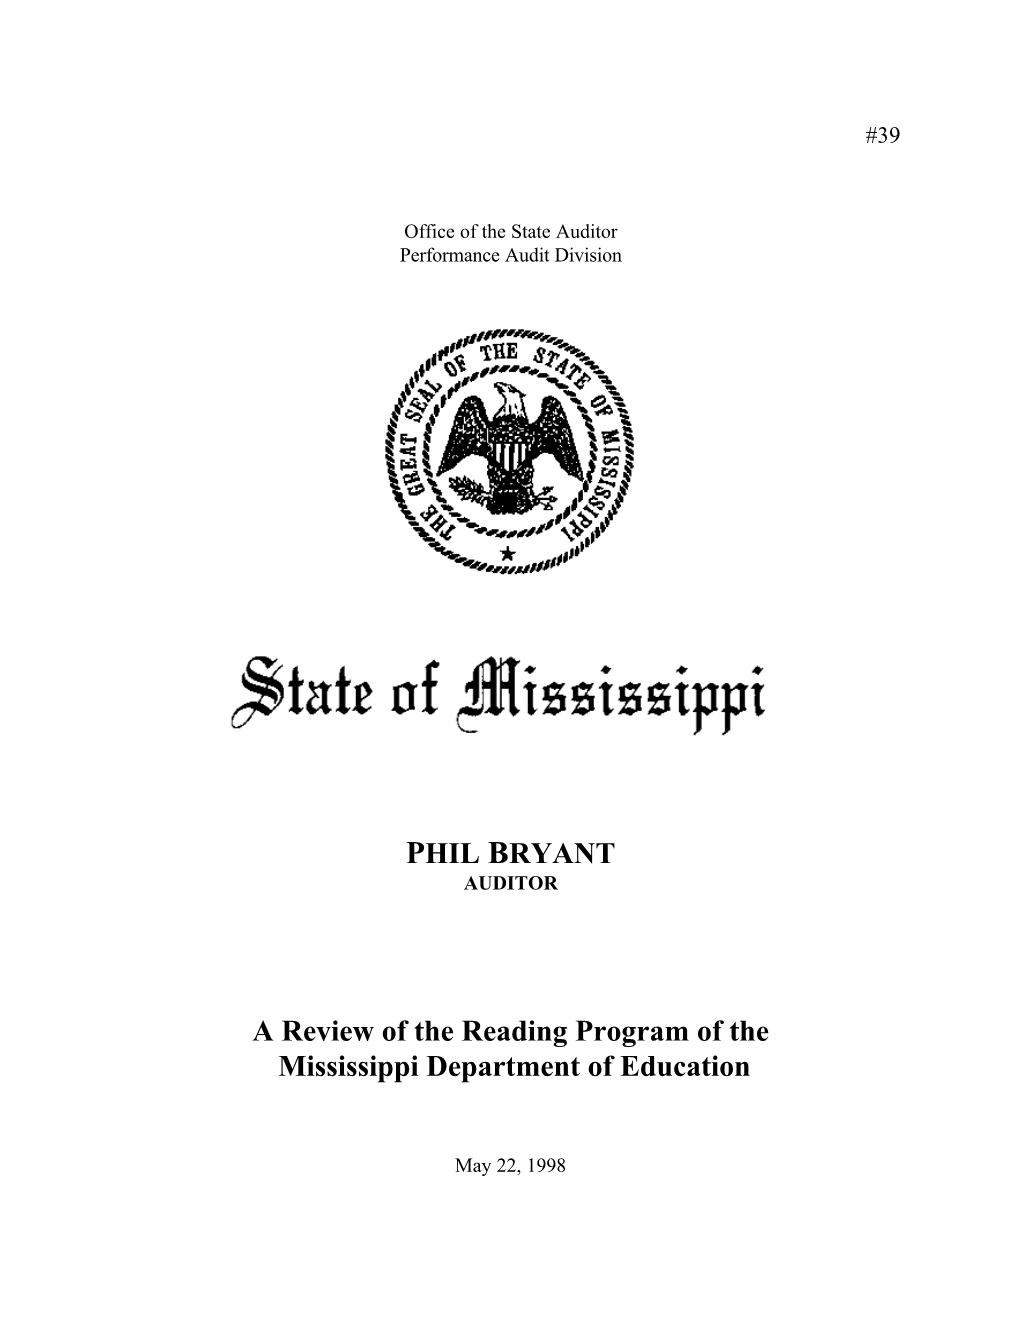 A Review of the Reading Program of the Mississippi Department of Education